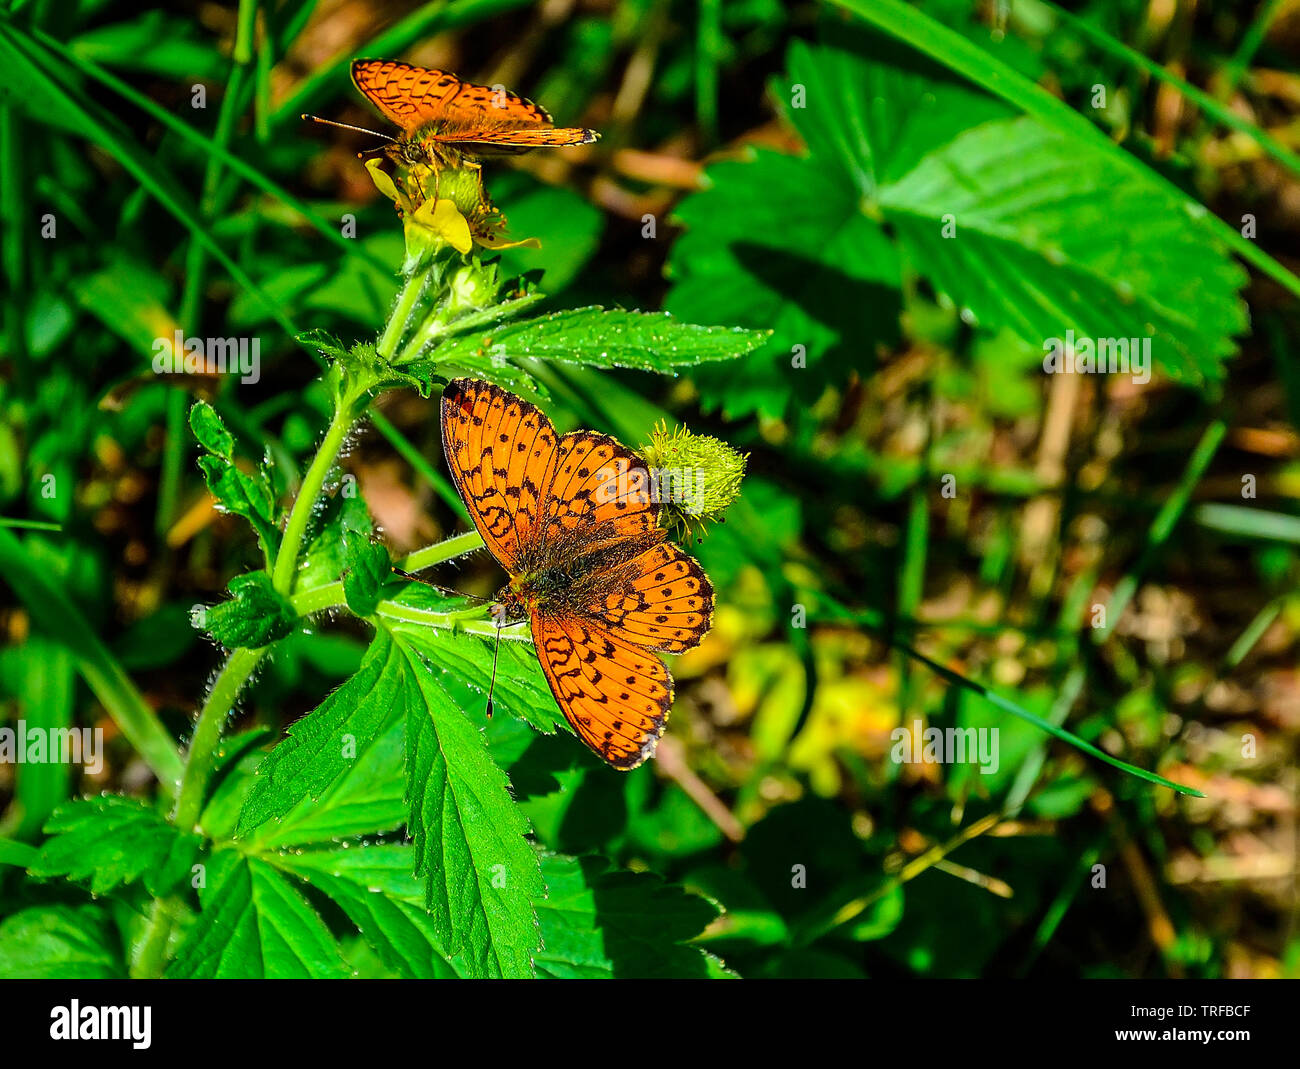 Two bright orange butterflies Lesser Marbled Fritillary (Argunnis paphia) in the forest on bur-marigold plant sitting with the wings spread out. Fauna Stock Photo